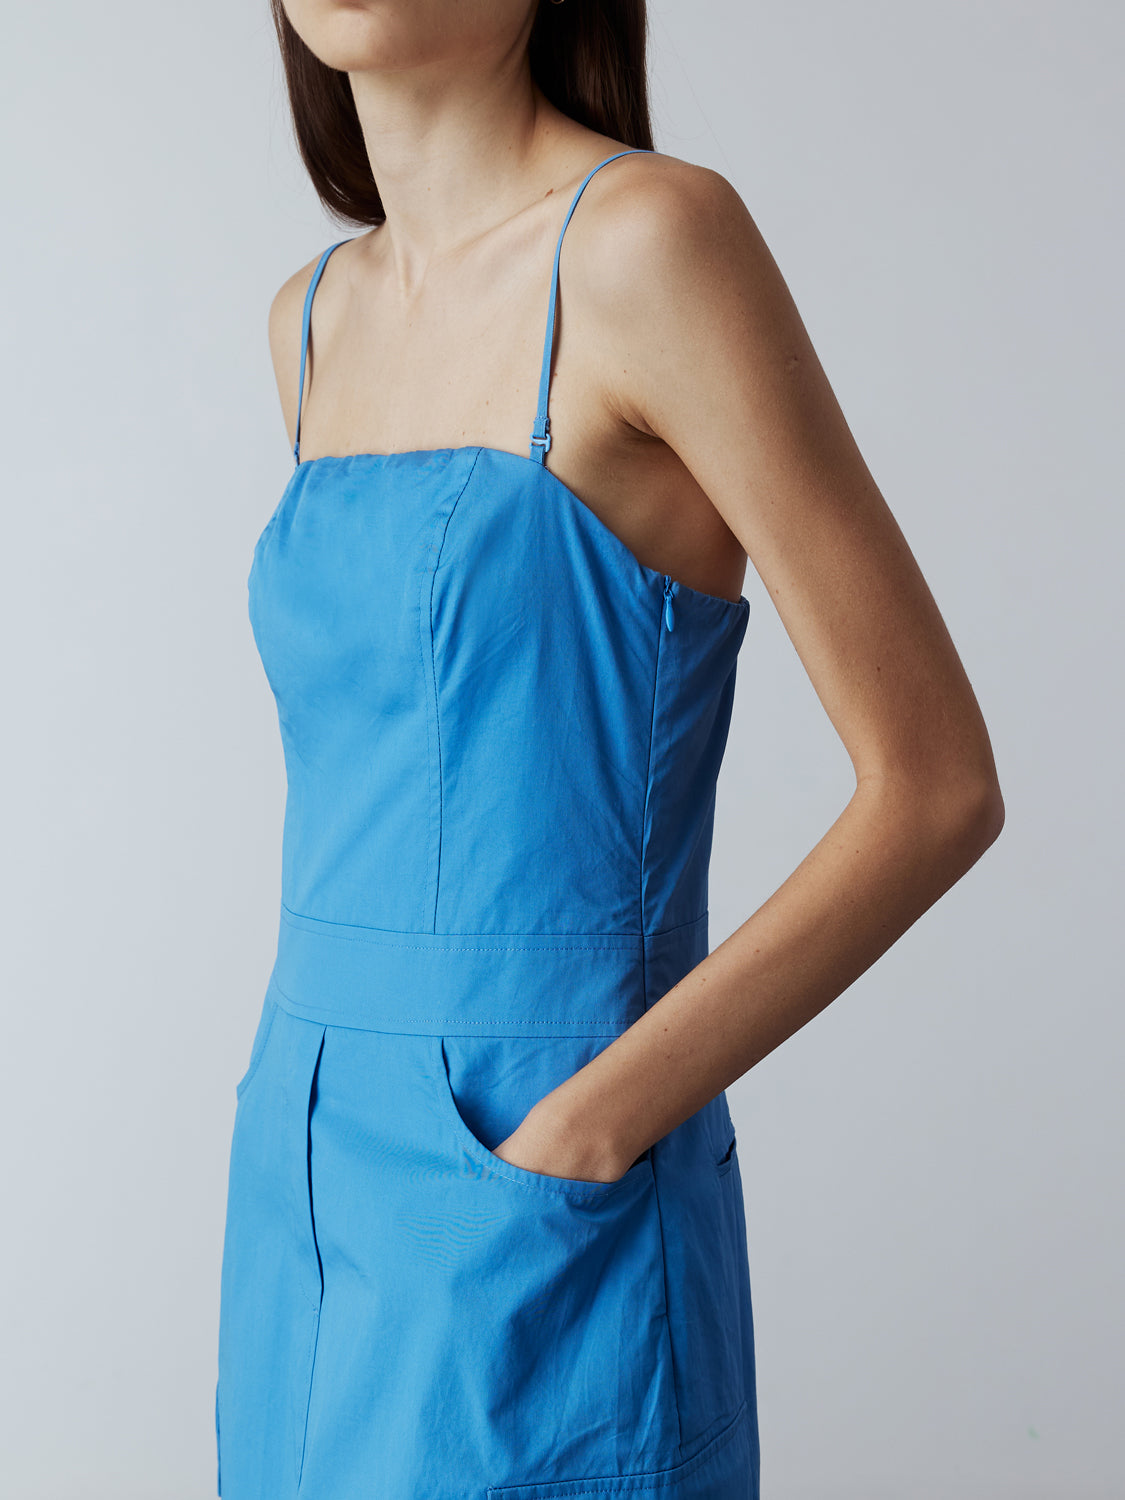 blue : Model is wearing the Adjustable Cargo Dress in Blue, which comes with back pockets, and cargo and slash pockets at the sides. This is a sleeveless garment with adjustable spaghetti straps. Can also be worn as a tube dress. Worn with Fitted Long Sleeve T-Shirt in Blue layered under and metallic silver heels.